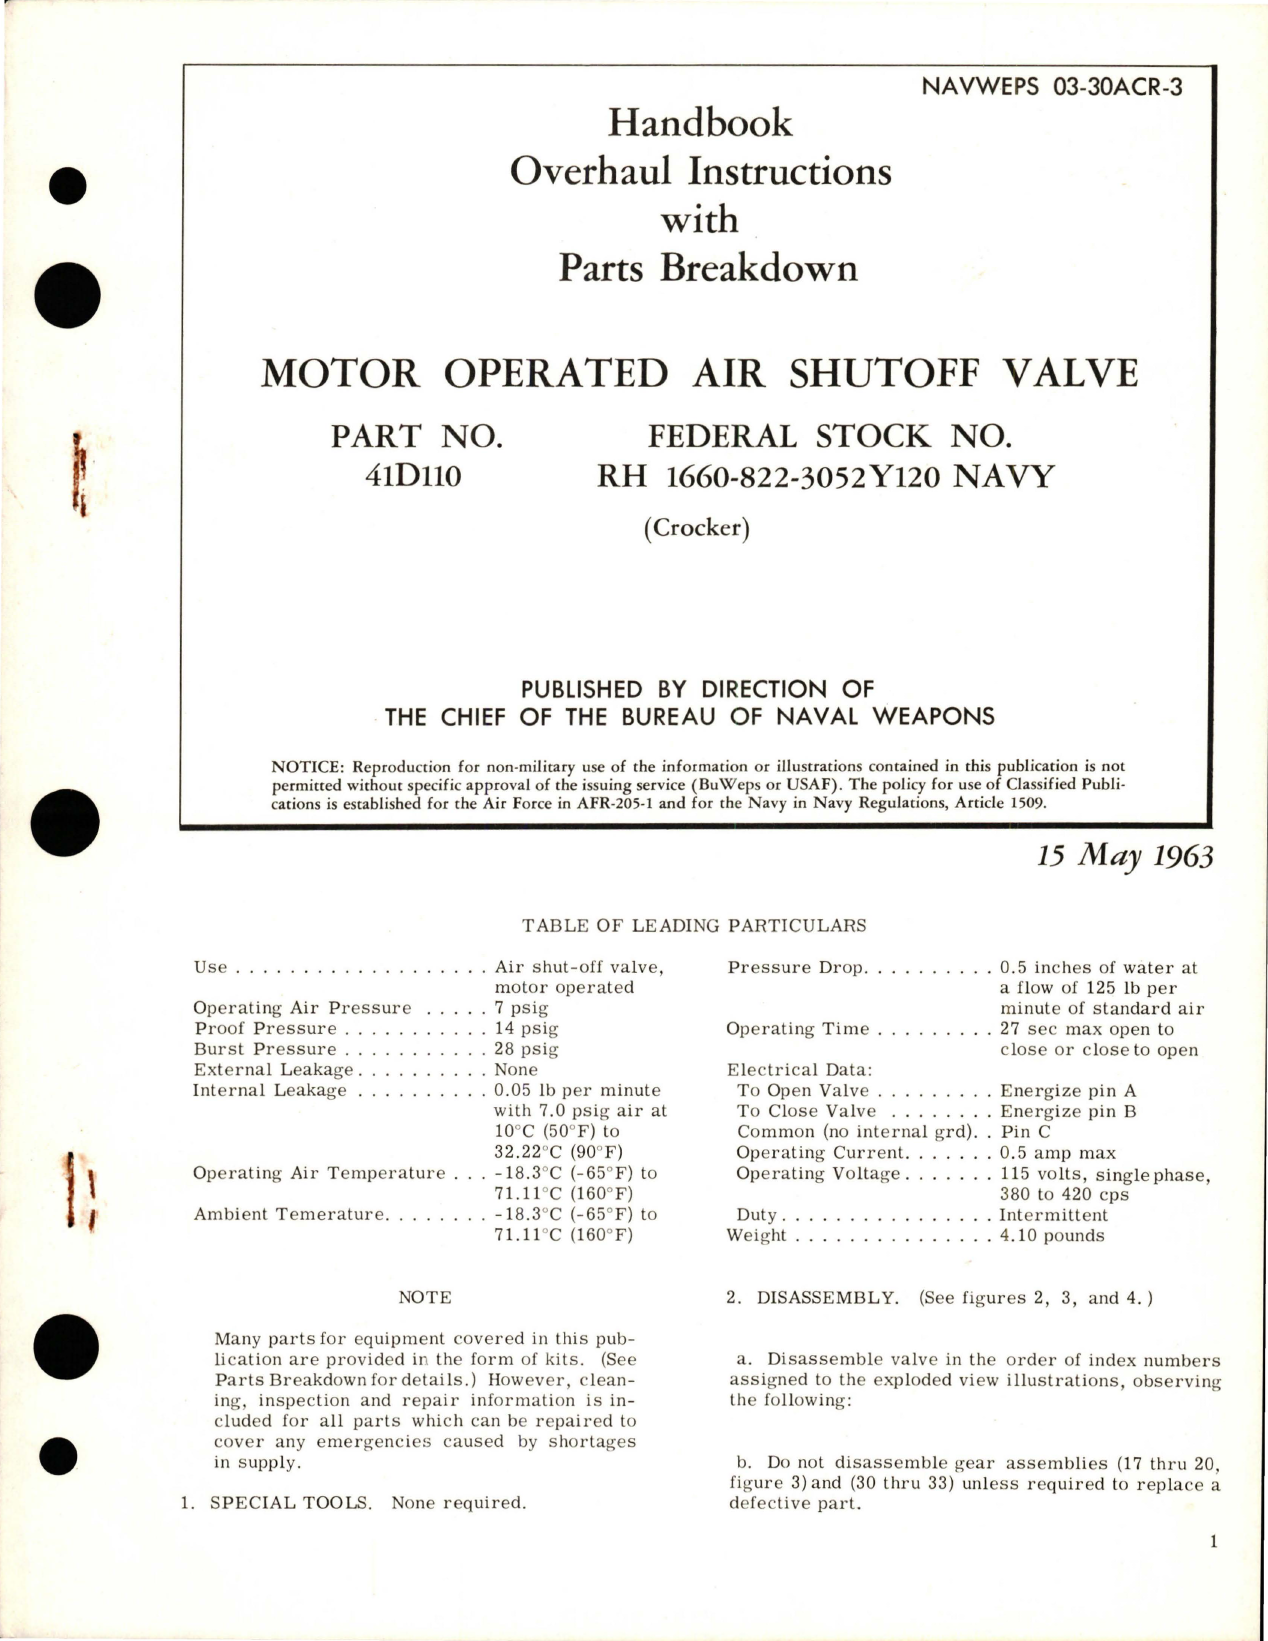 Sample page 1 from AirCorps Library document: Overhaul Instructions with Parts Breakdown for Motor Operated Air Shutoff Valve - Part 41D110 